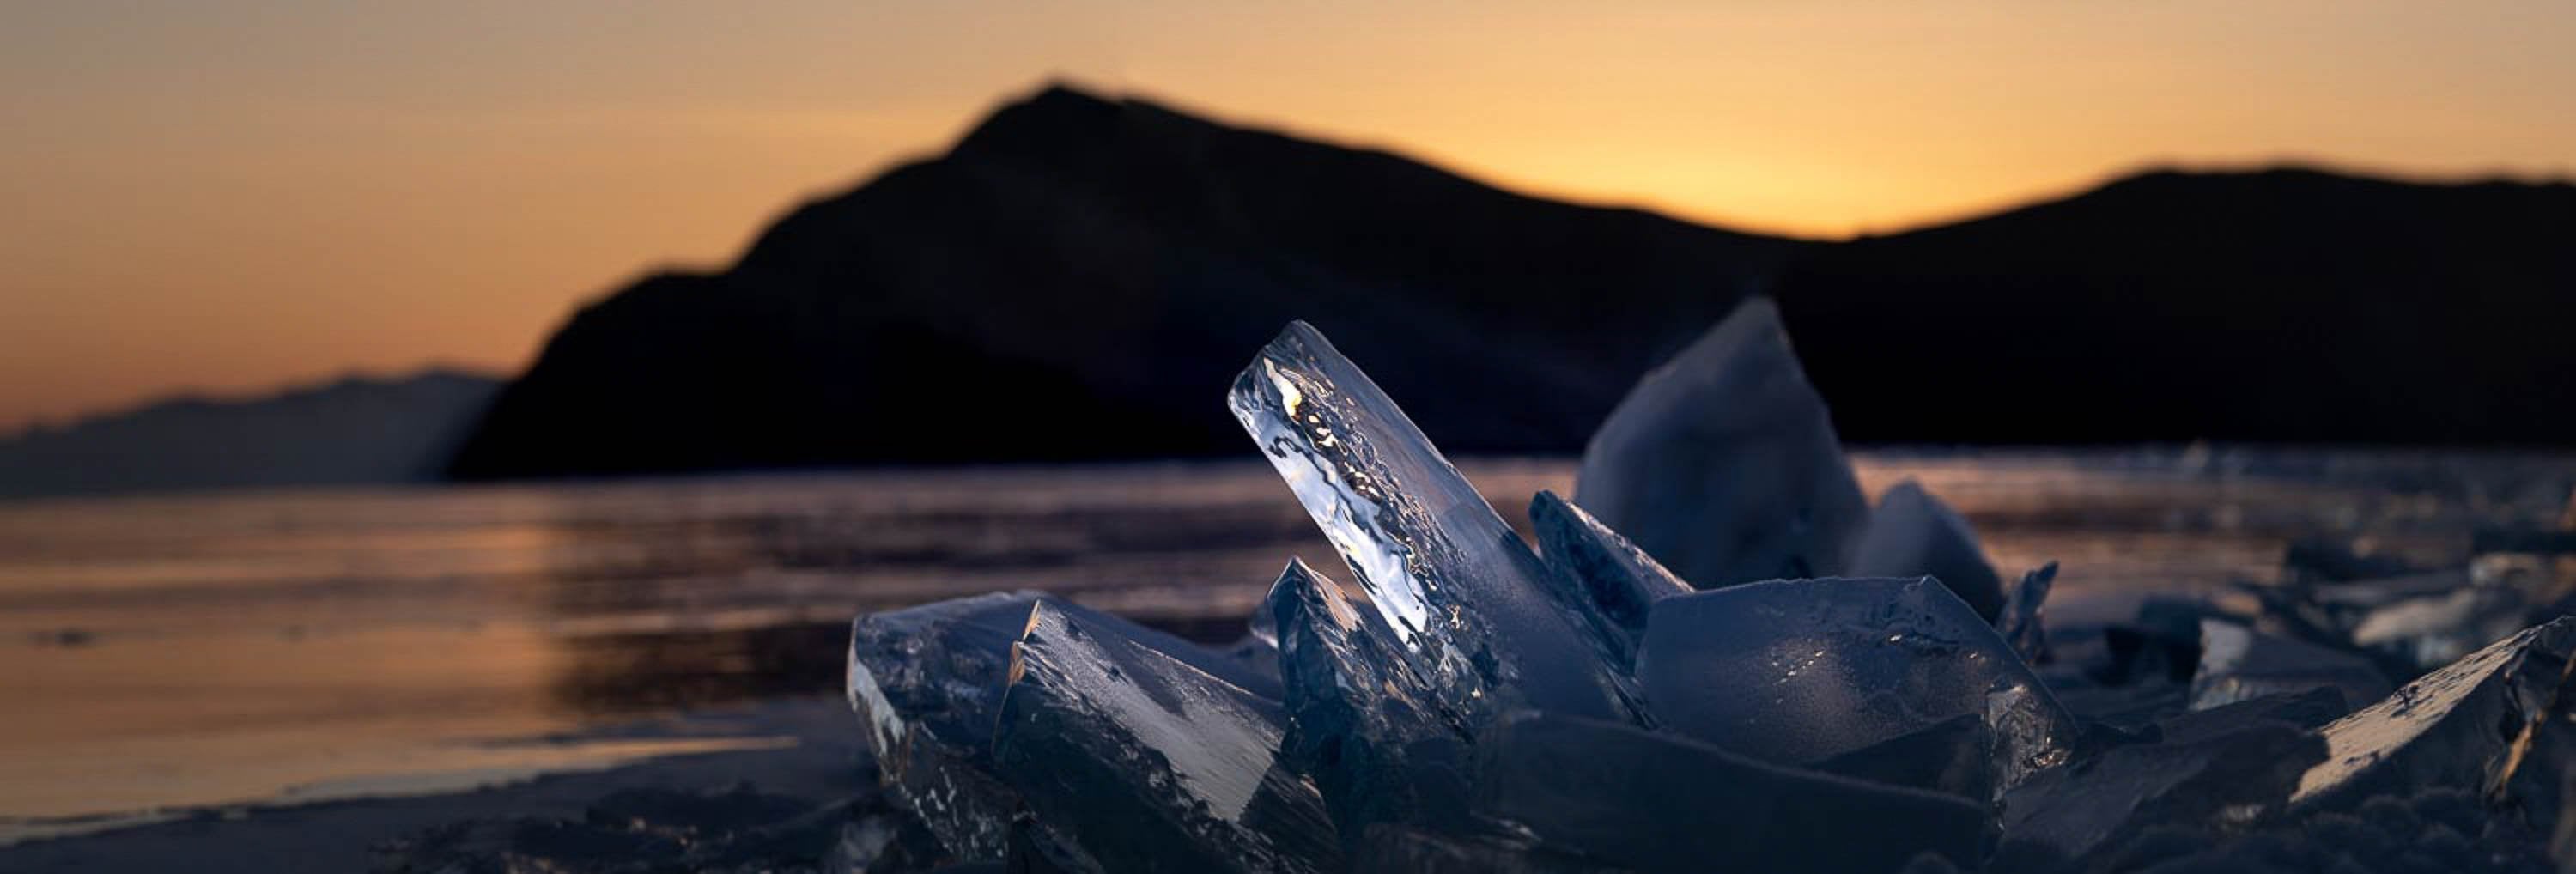 A dark Close-up view of crystalline ice pieces, Lake Baikal #49, Siberia, Russia